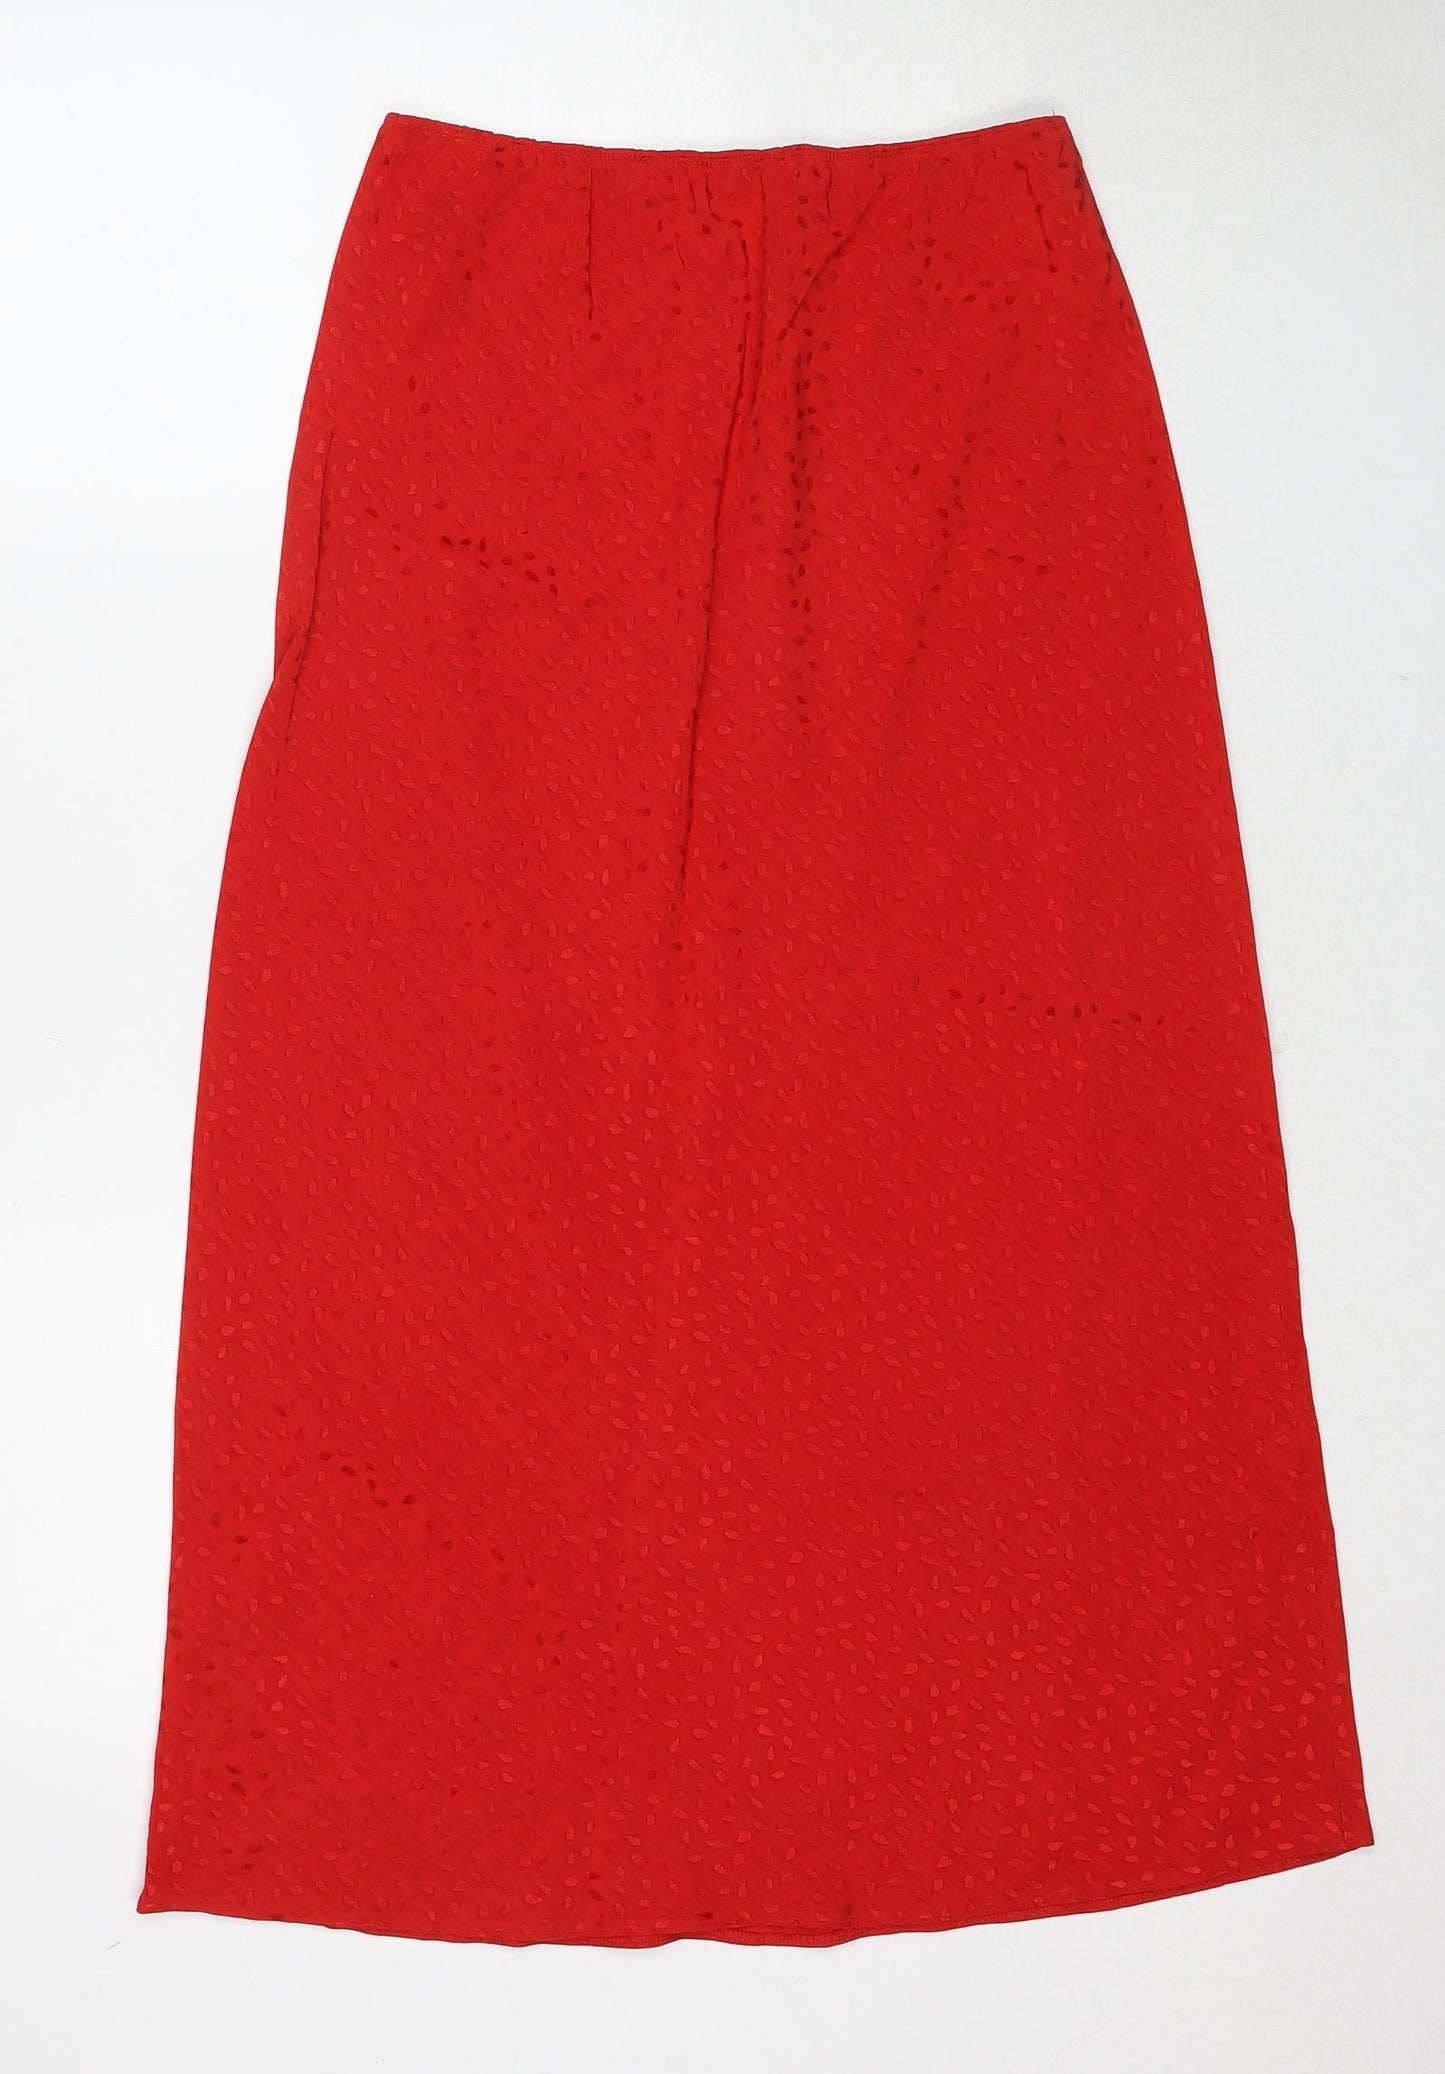 Topshop Womens Red Geometric Polyester A-Line Skirt Size 10